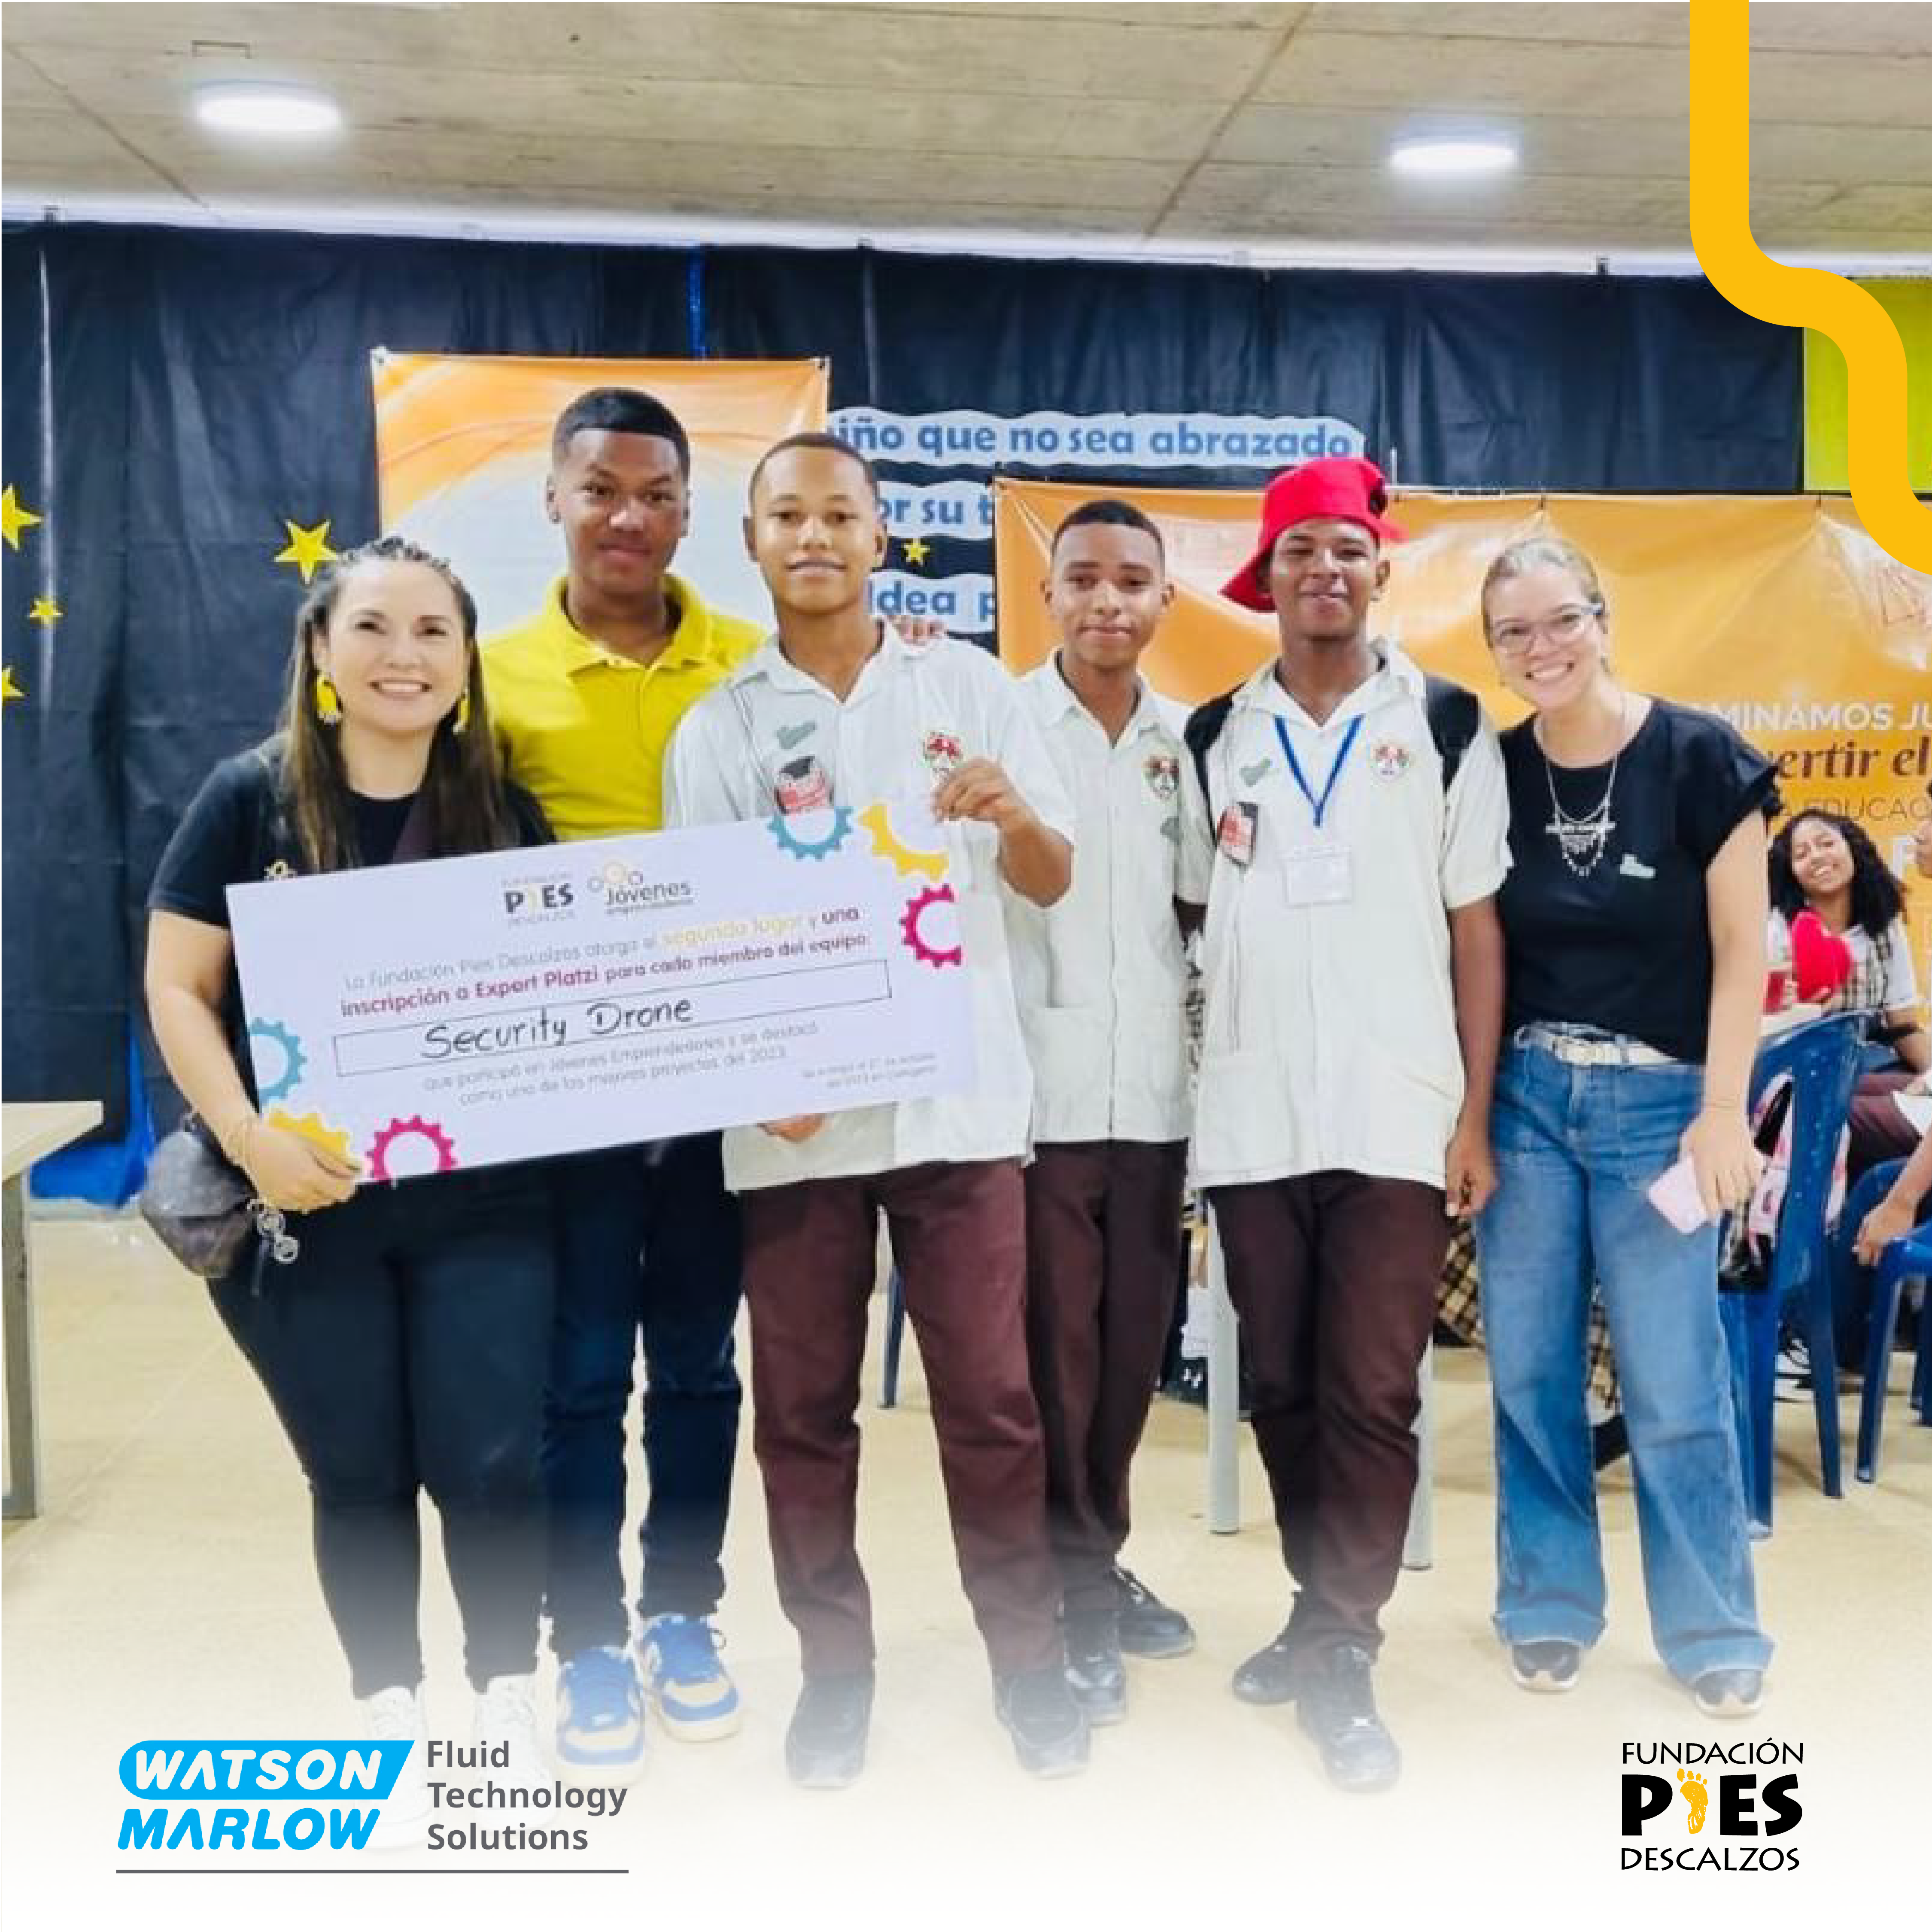 Young entrepreneurs program supports kids in Cartagena